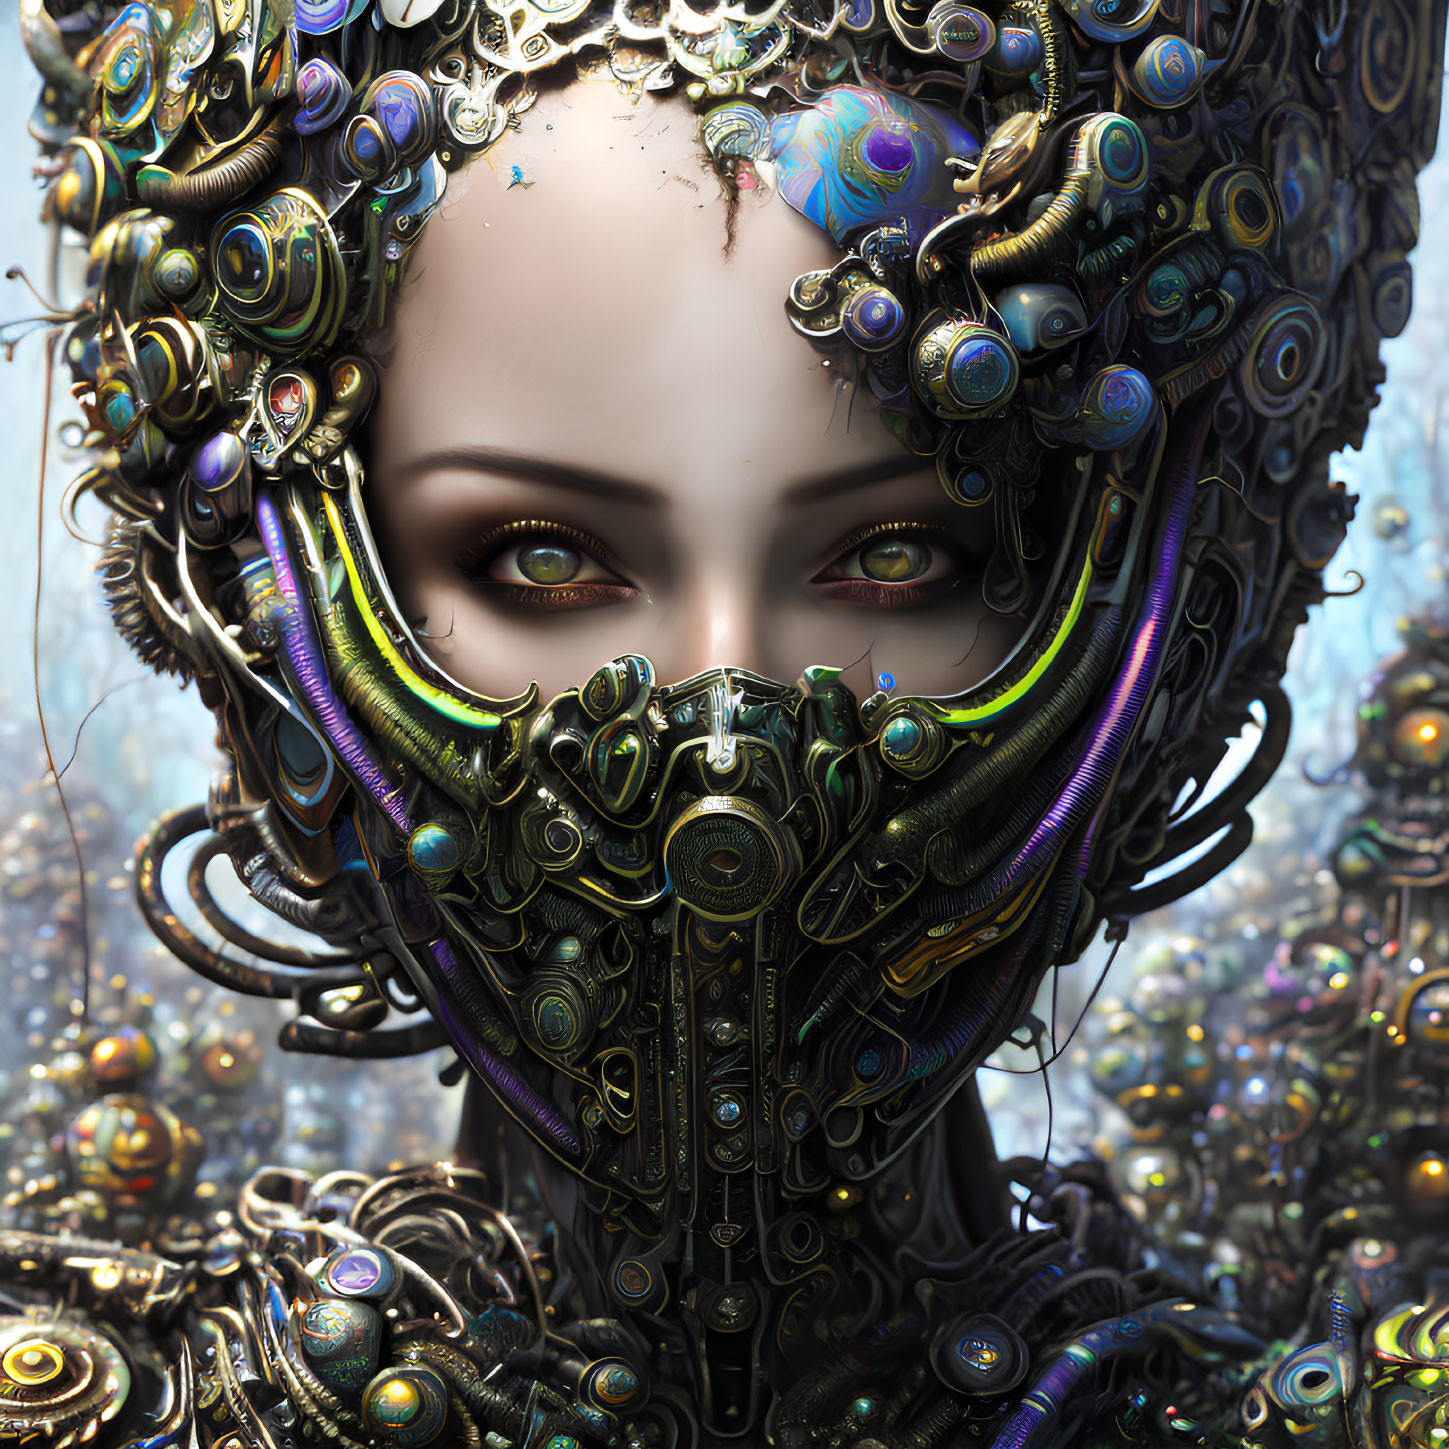 Cybernetic humanoid with ornate headpiece and mask in digital art piece